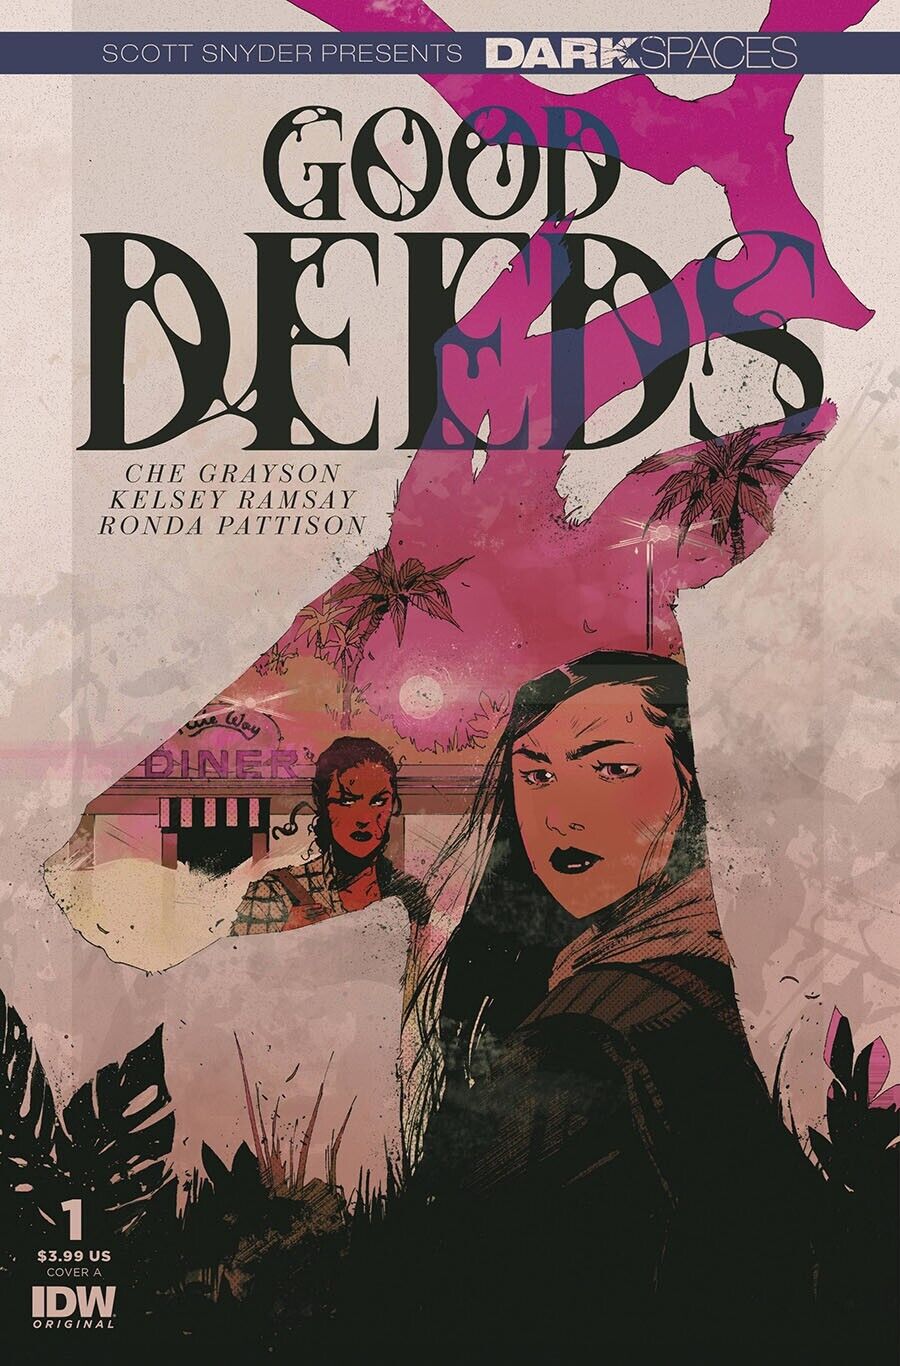 DARK SPACES: GOOD DEEDS 1 NM COVER A | CHE GRAYSON | IDW OPTIONED COMIC